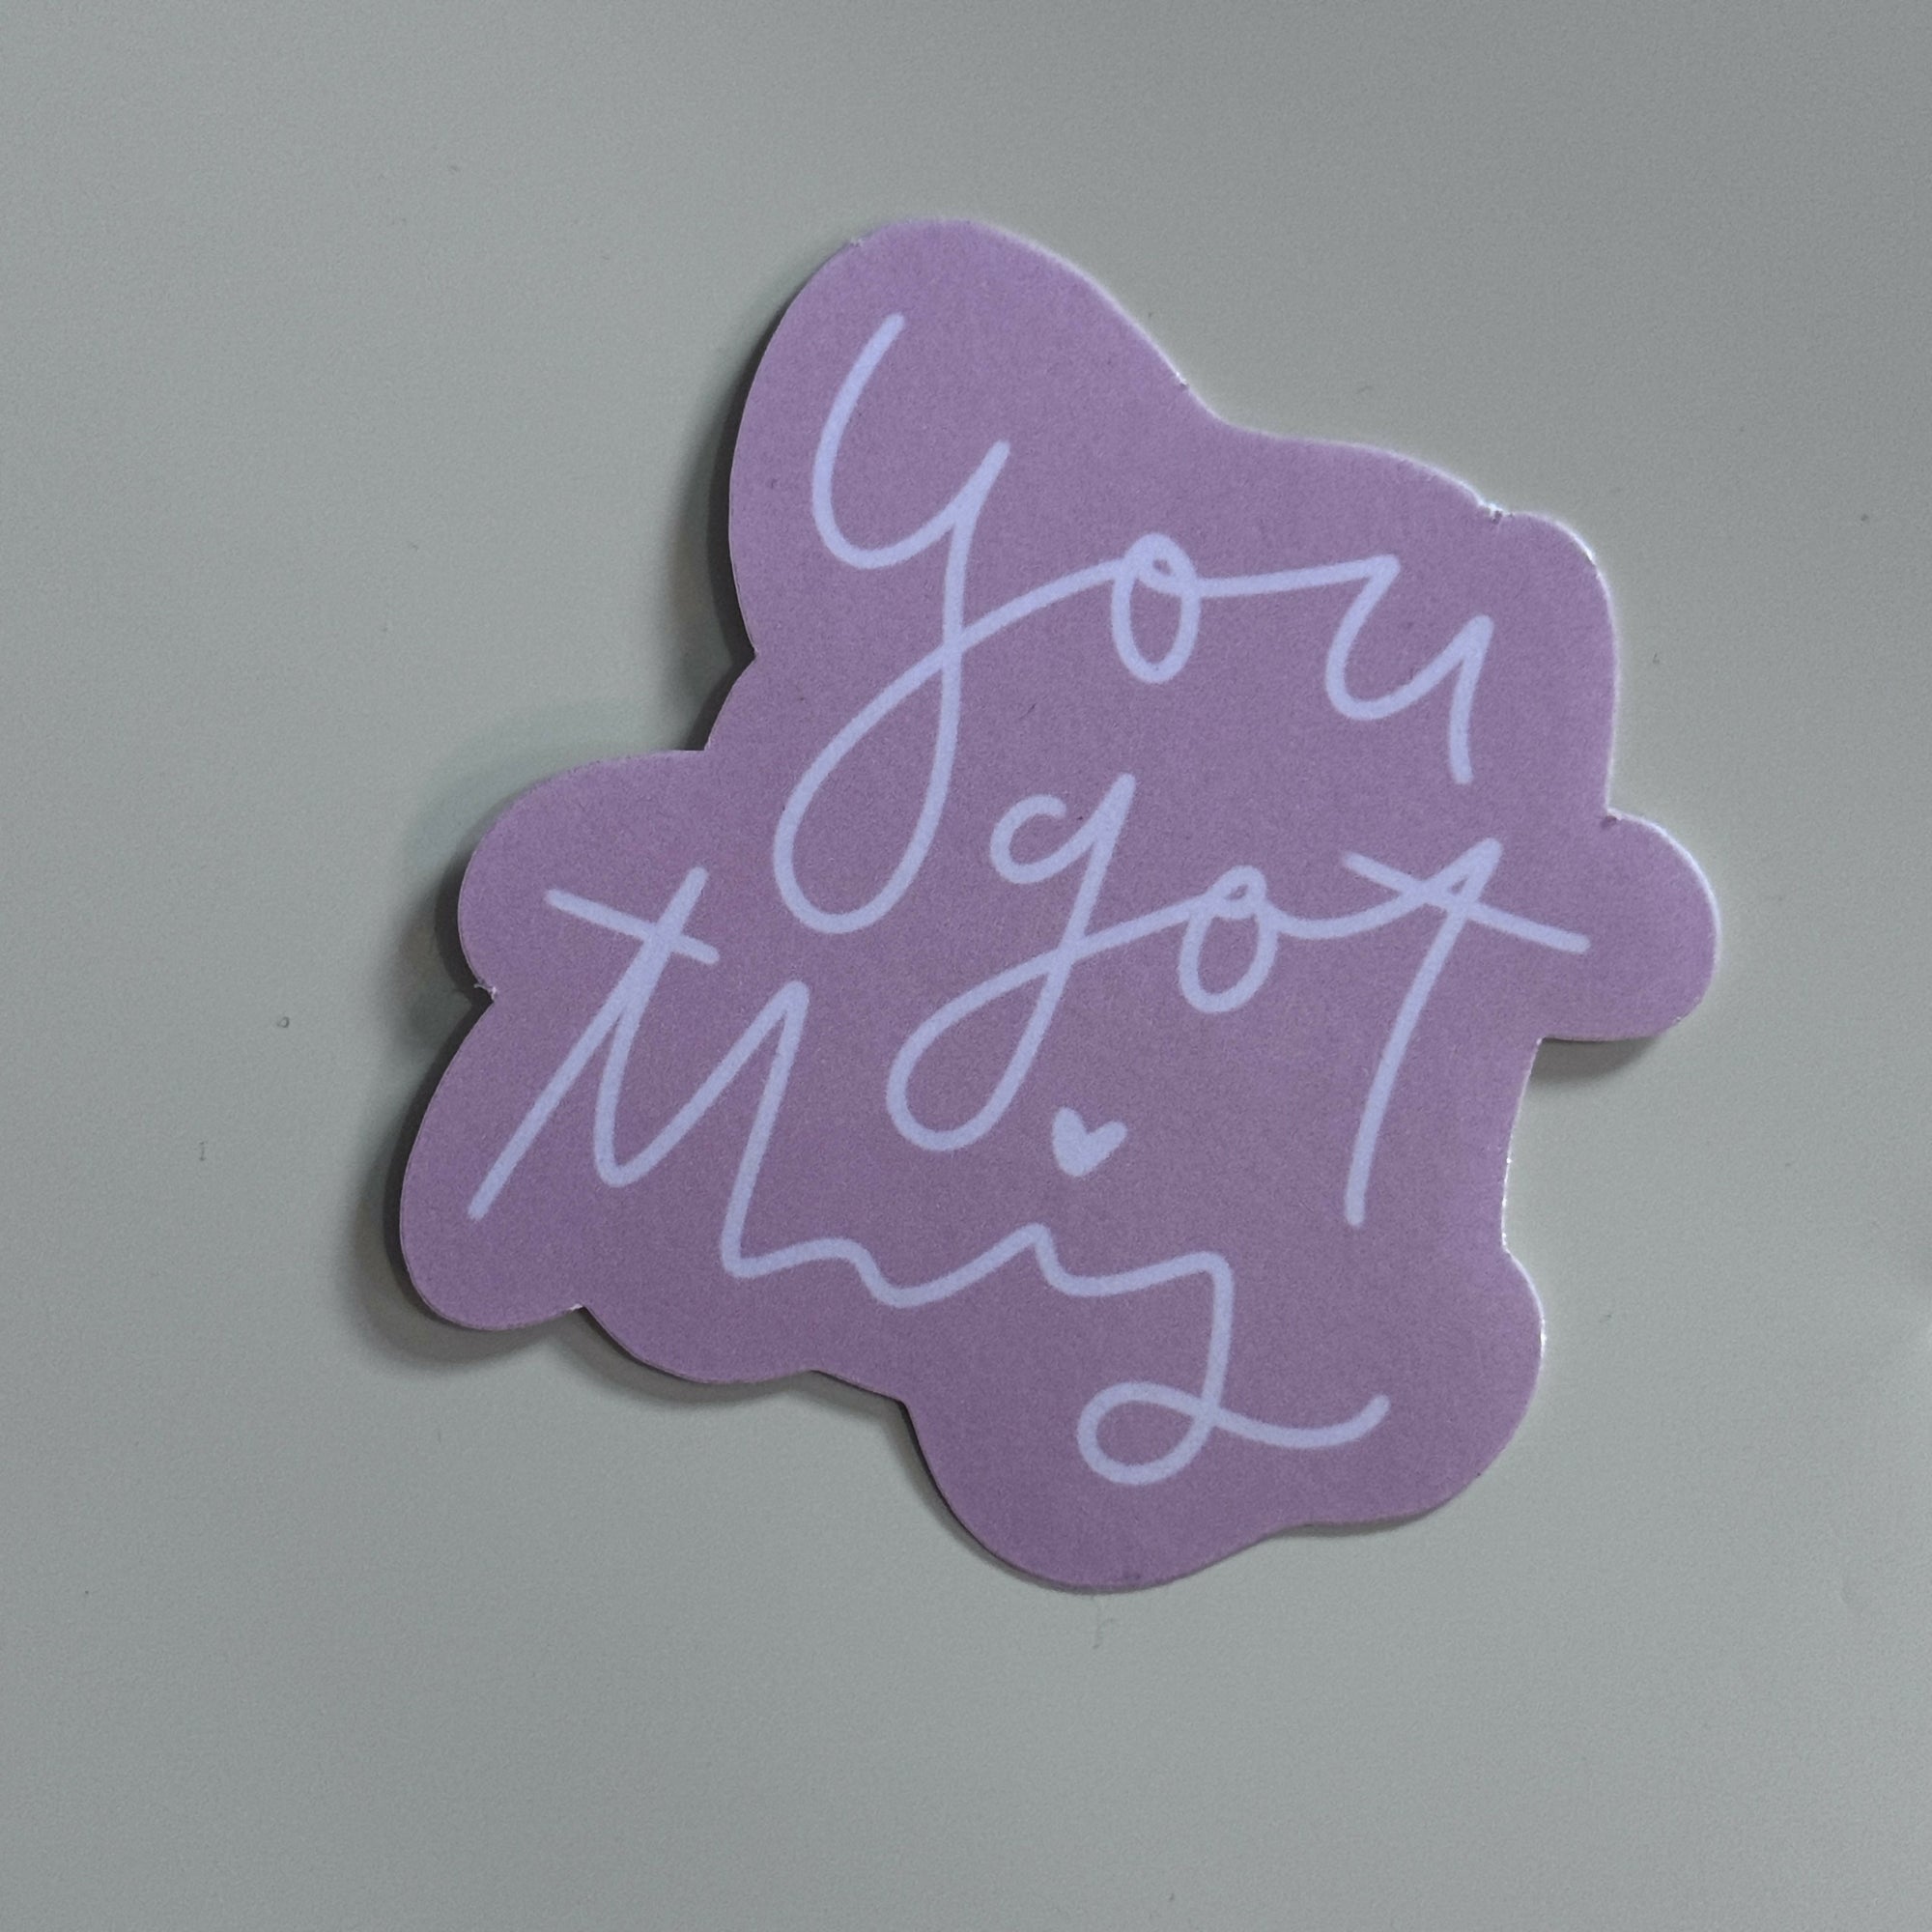 Artistic Xpressions | You Got This (pink) Sticker